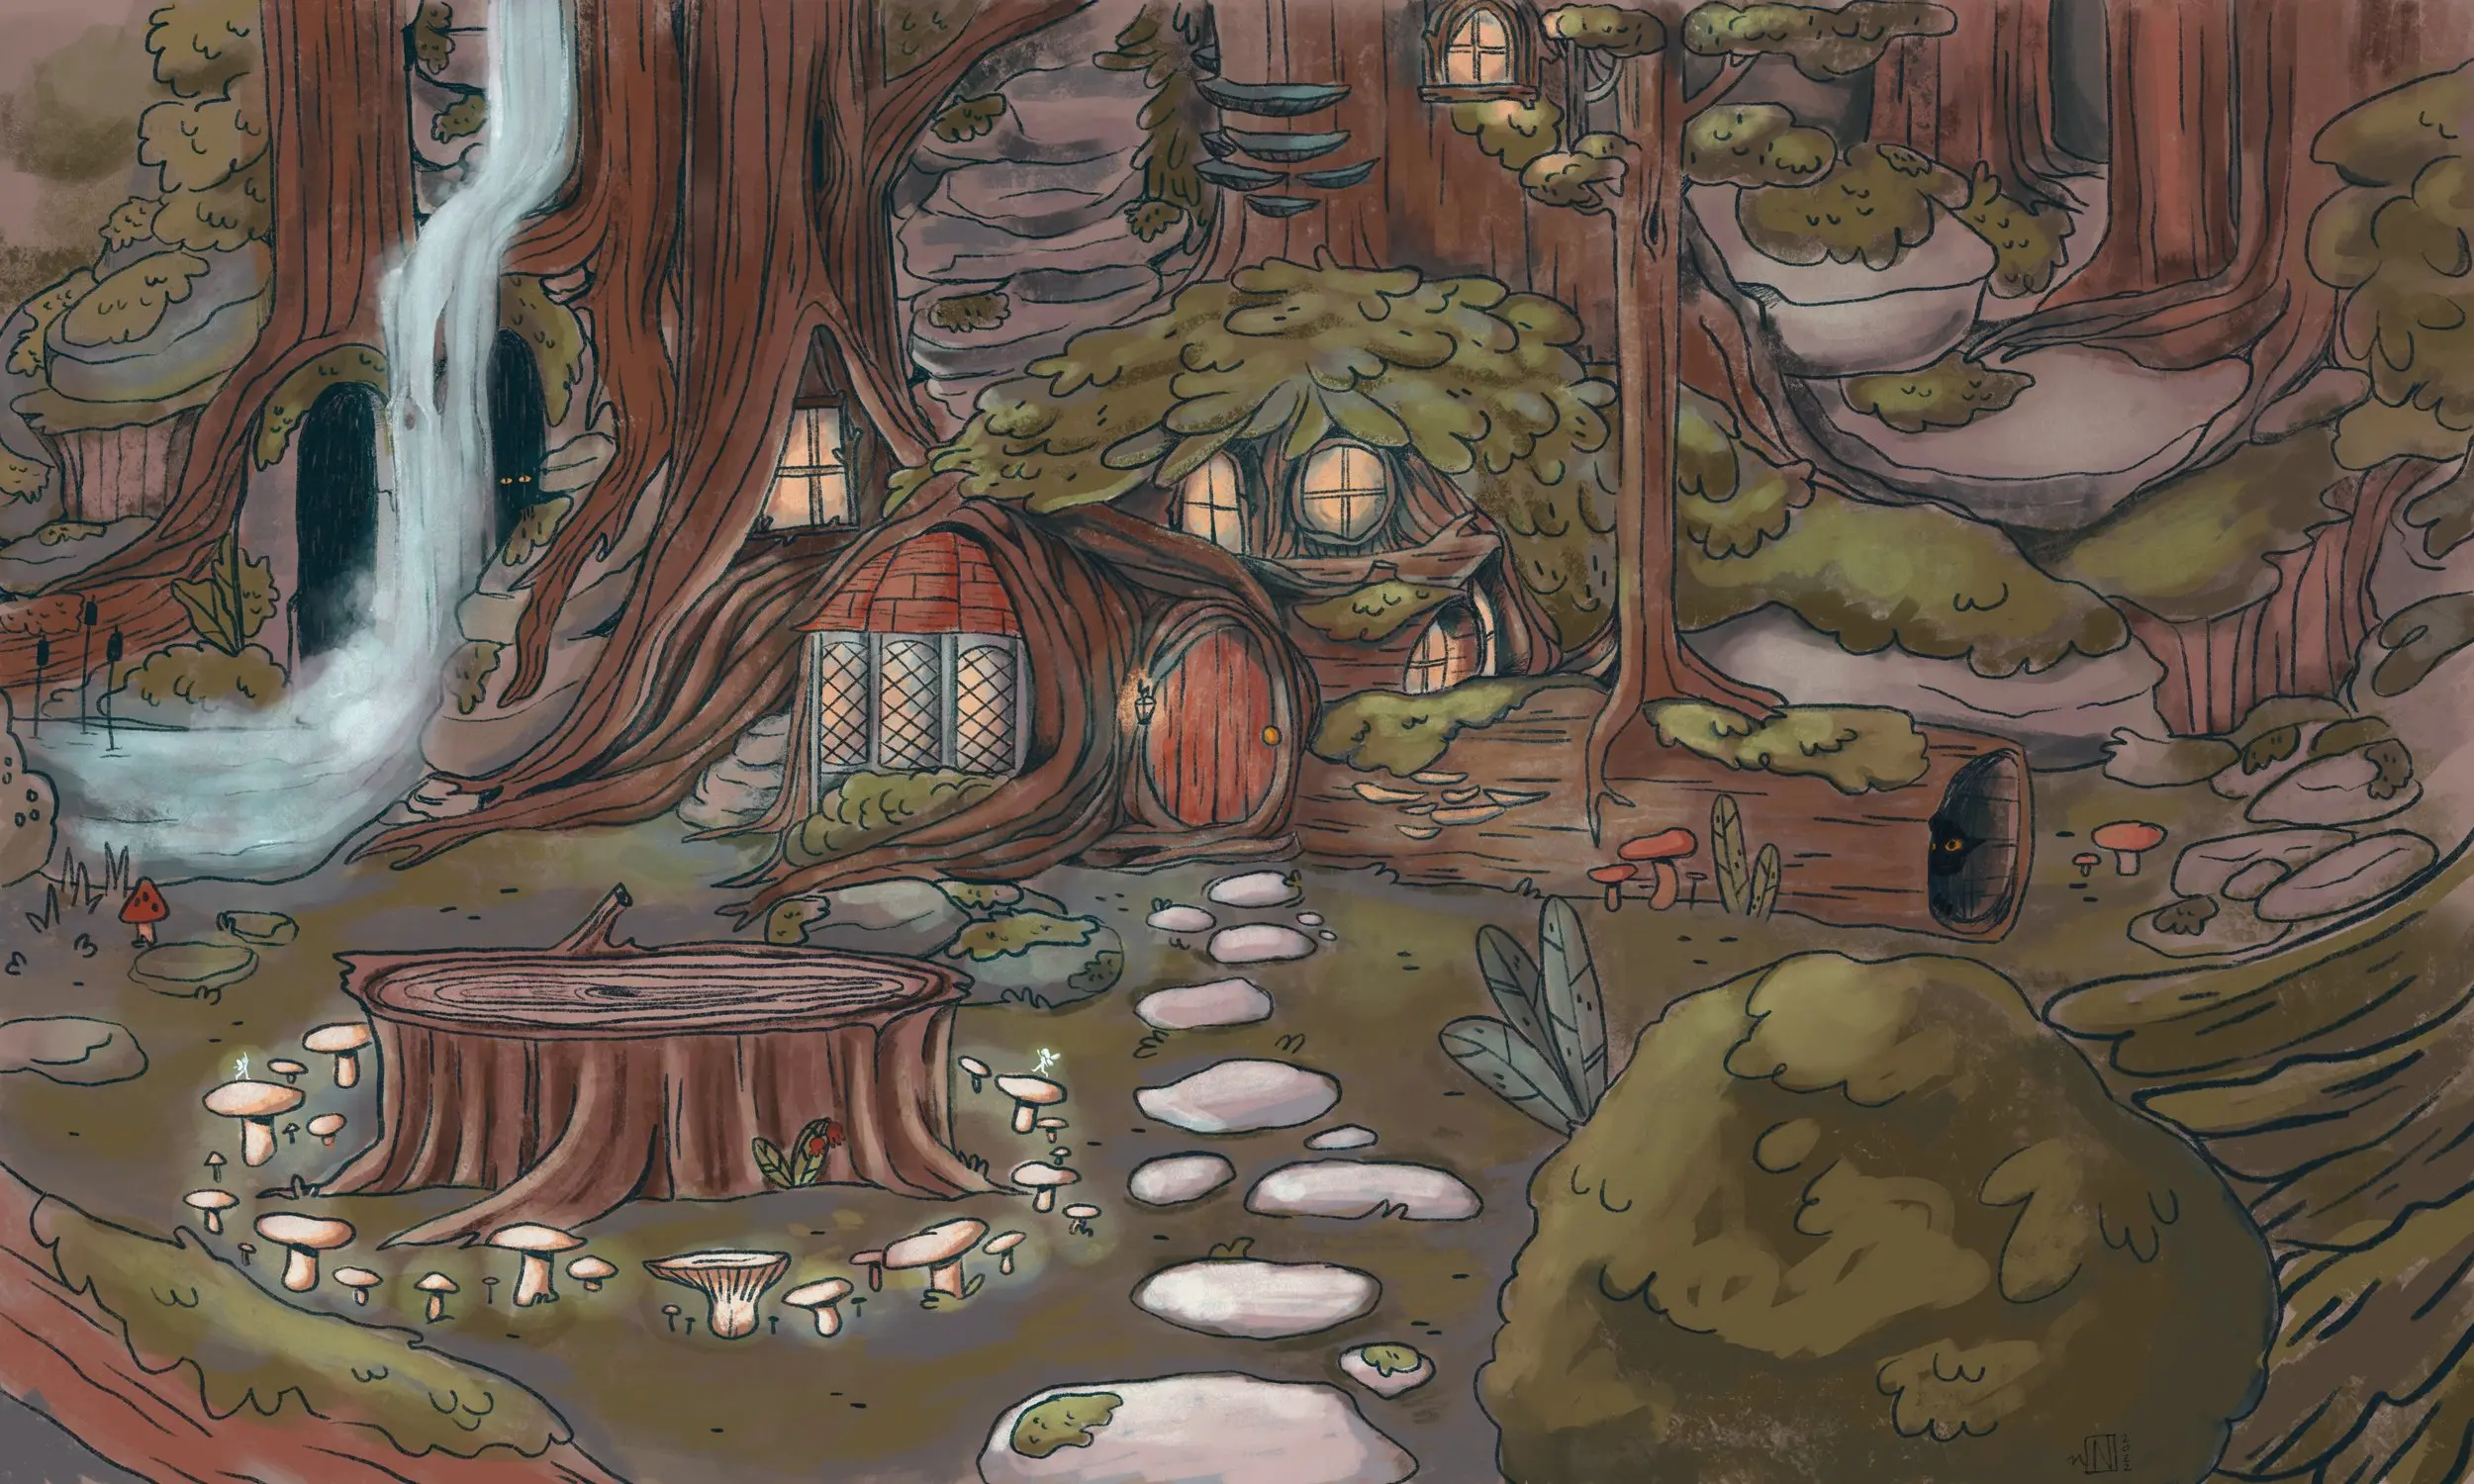 Magical and cozy forest scene beautifully illustrated